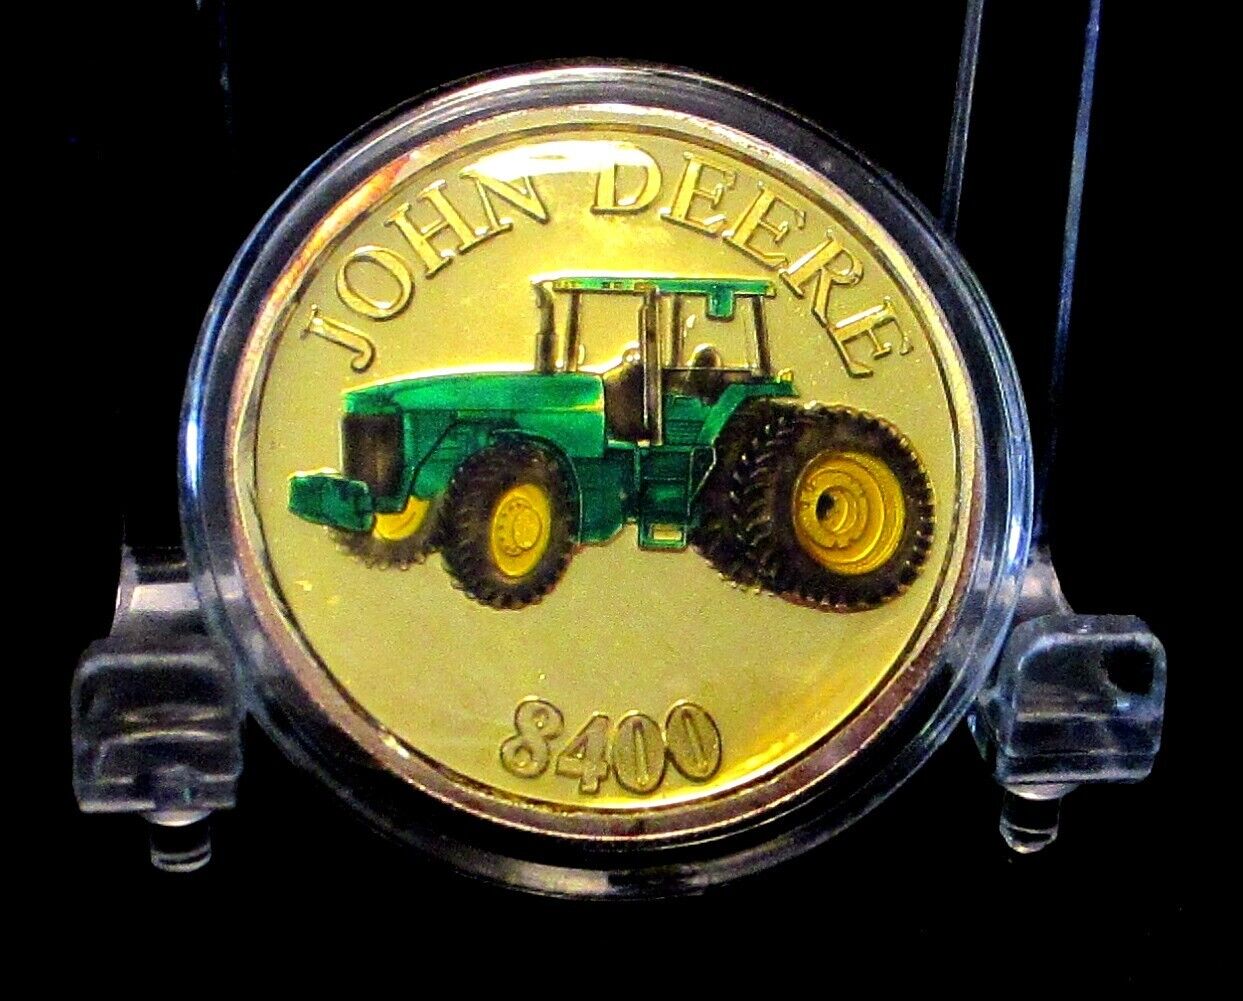 John Deere Silver Round Coin 8400 Tractor 1 oz .999 Fine Silver Gold Colored  jd